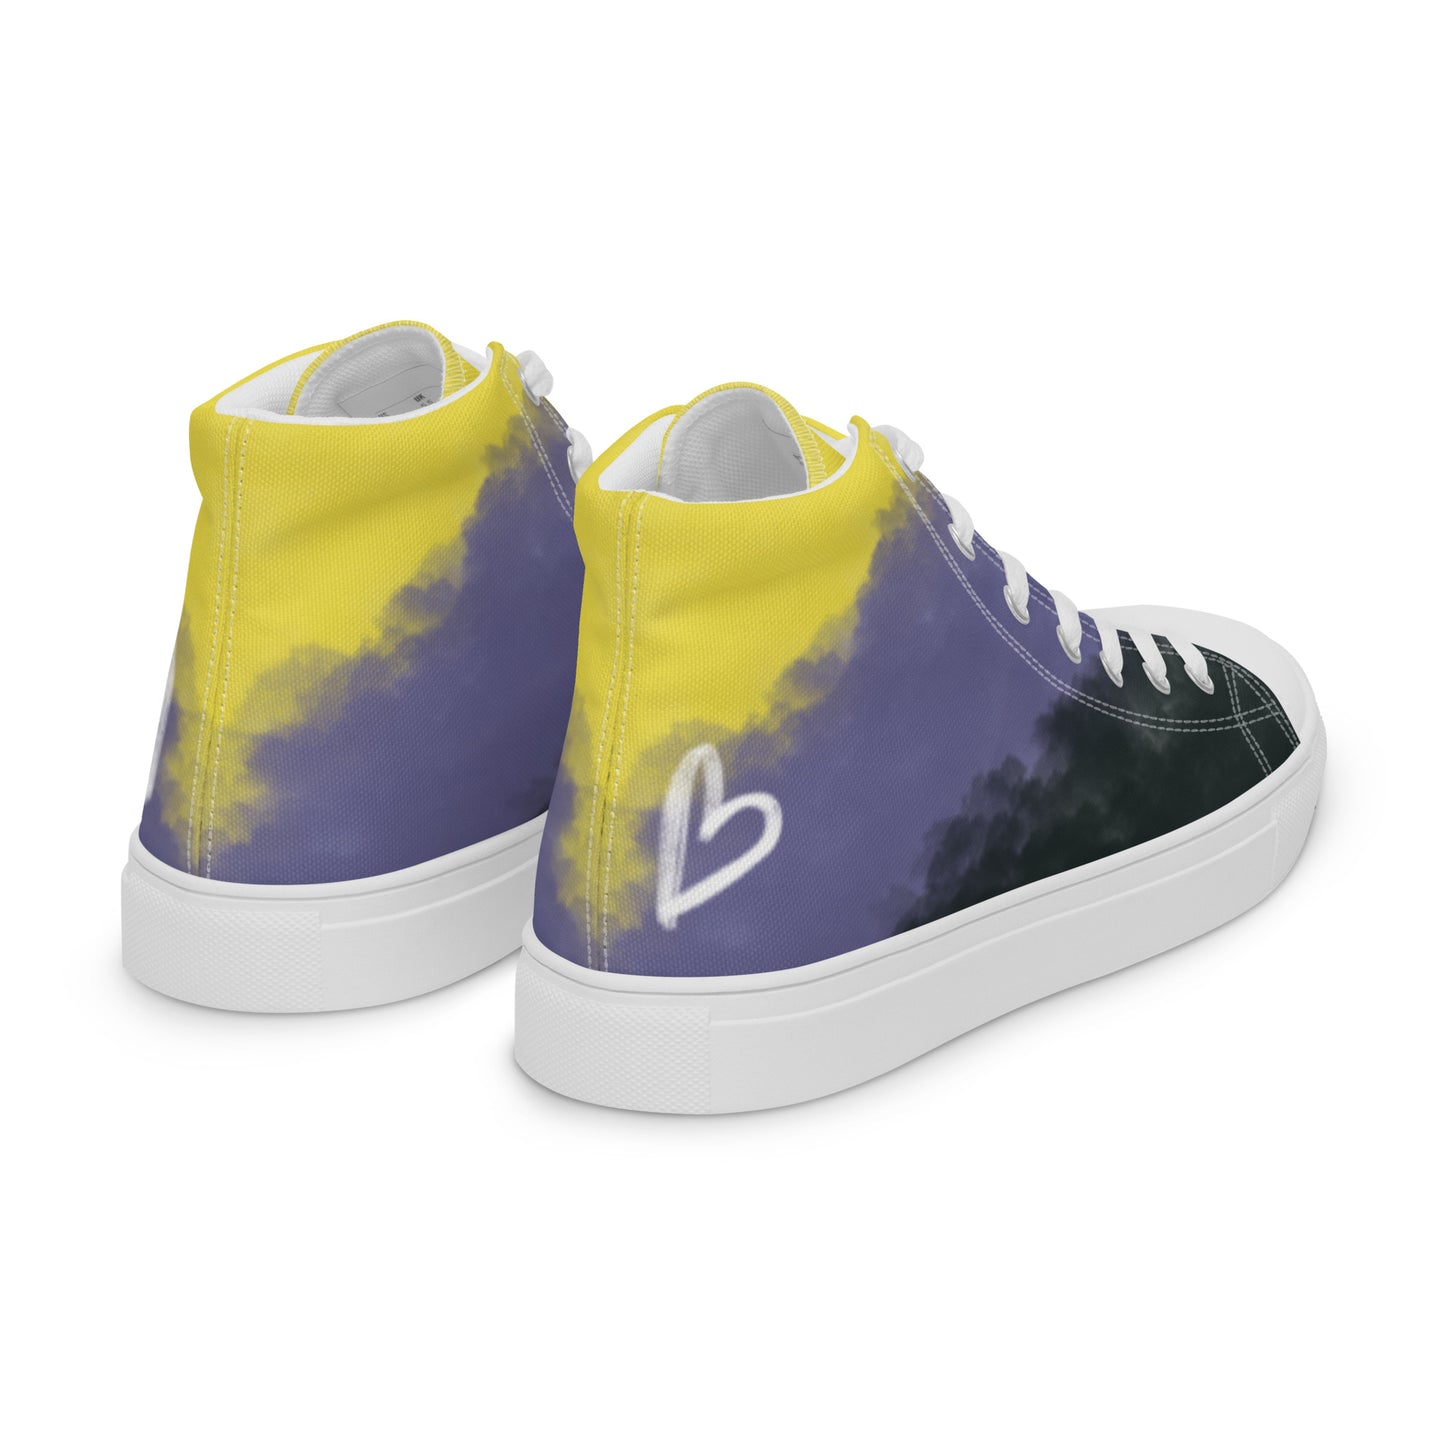 Right back view: a pair of high-top canvas shoes with cloudy color blocks of the yellow, purple, and black non-binary flag colors with white laces and accents, a white heart on the heel, and white Aras Sivad Studio logo on the tongue.